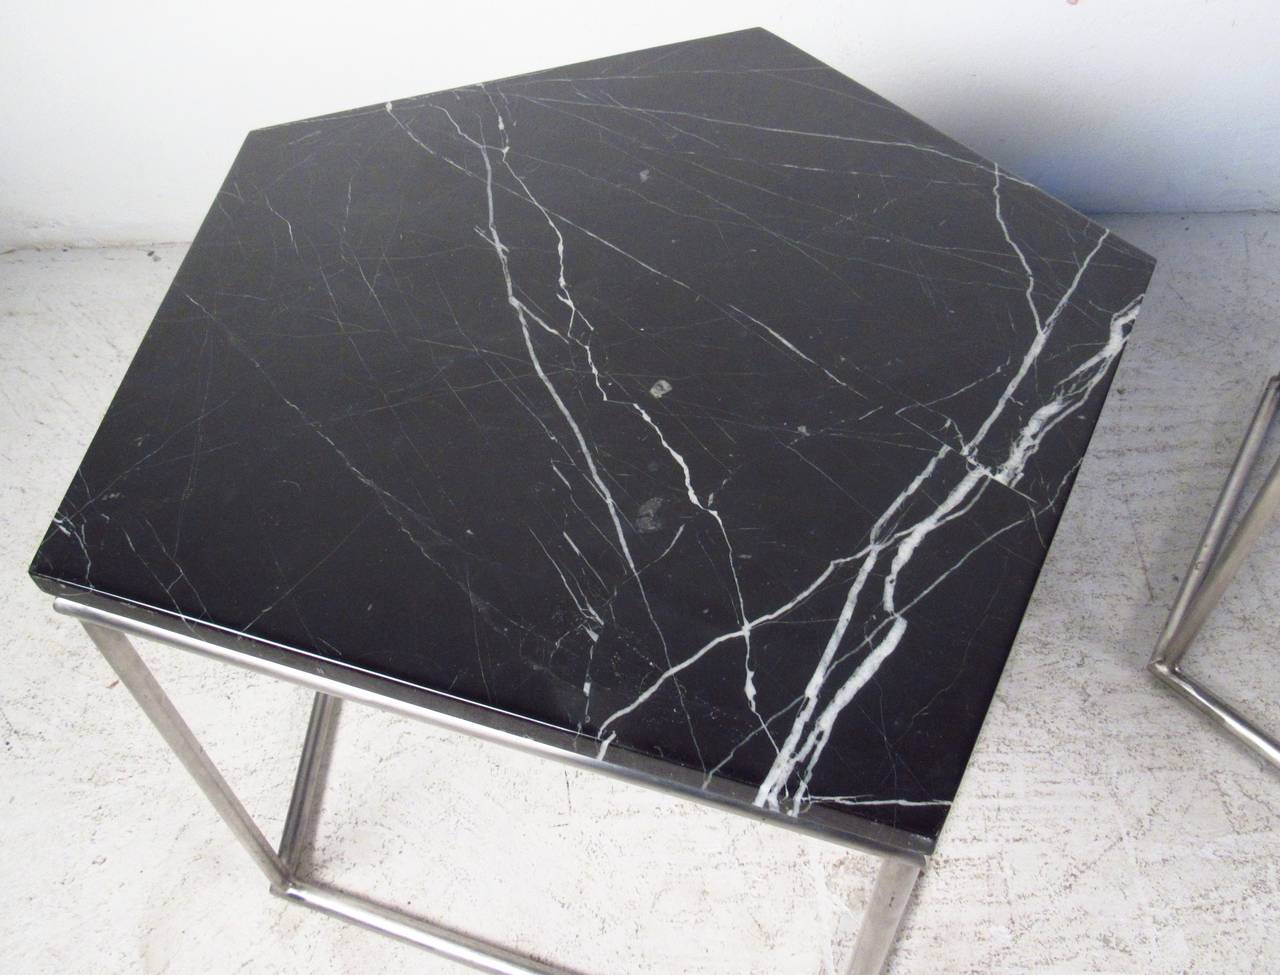 Two vintage-modern side tables, each features a chrome base and a black marble top in the shape of a pentagon. A unique pair that can form a coffee table when placed together. This stylish pair of end tables that's ideal for a living room display or